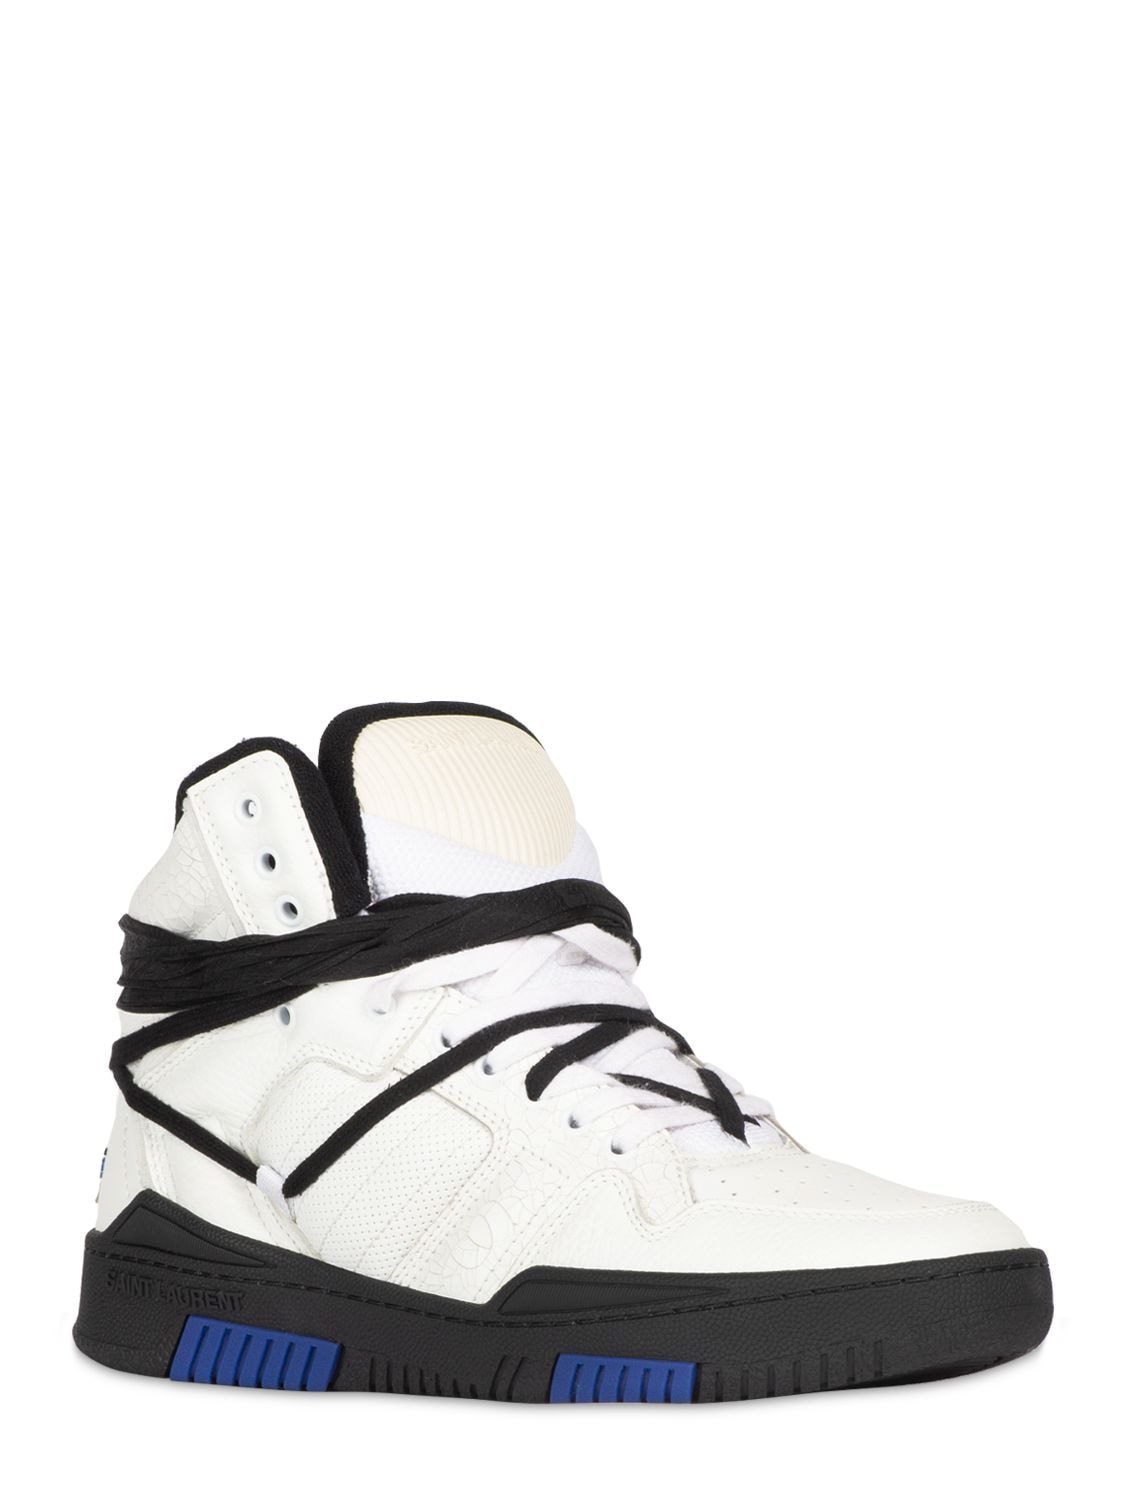 Saint Laurent Smith Grained Leather Sneakers In White | ModeSens